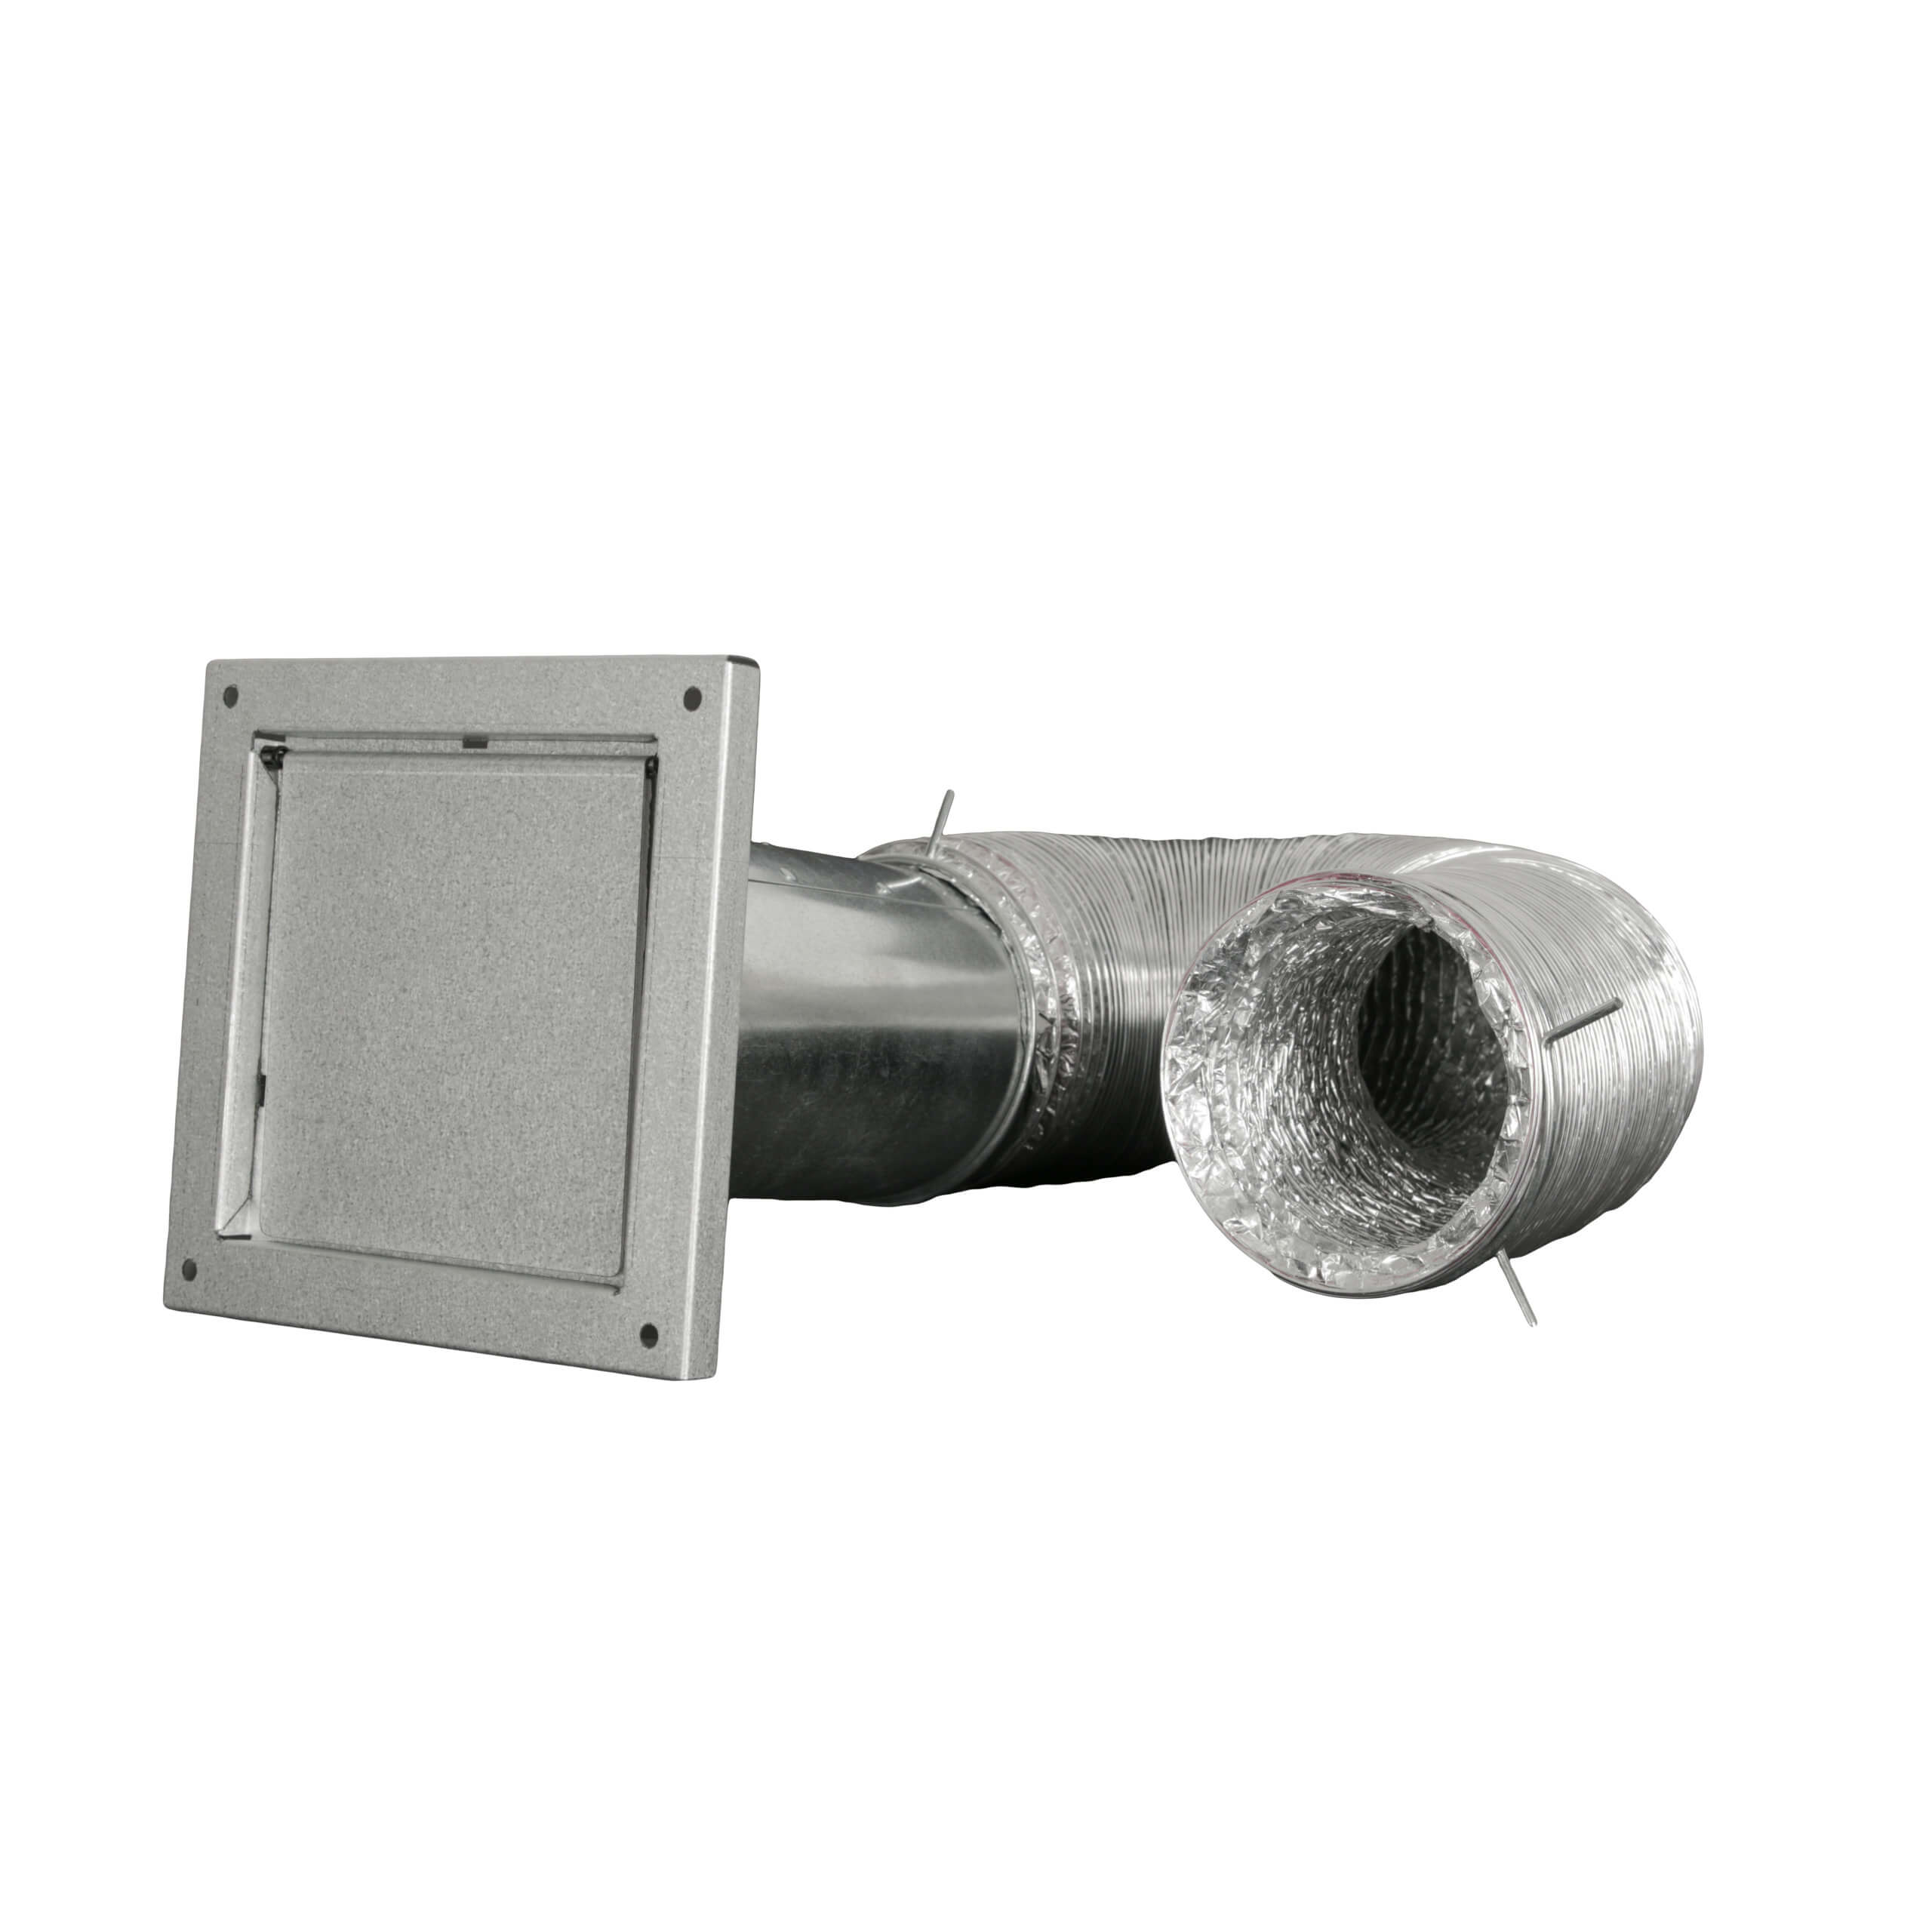 Closed view of FAMCO Dryer Vent Kit with Flush Mount Zinc-Aluminum Metal Wall Vent.